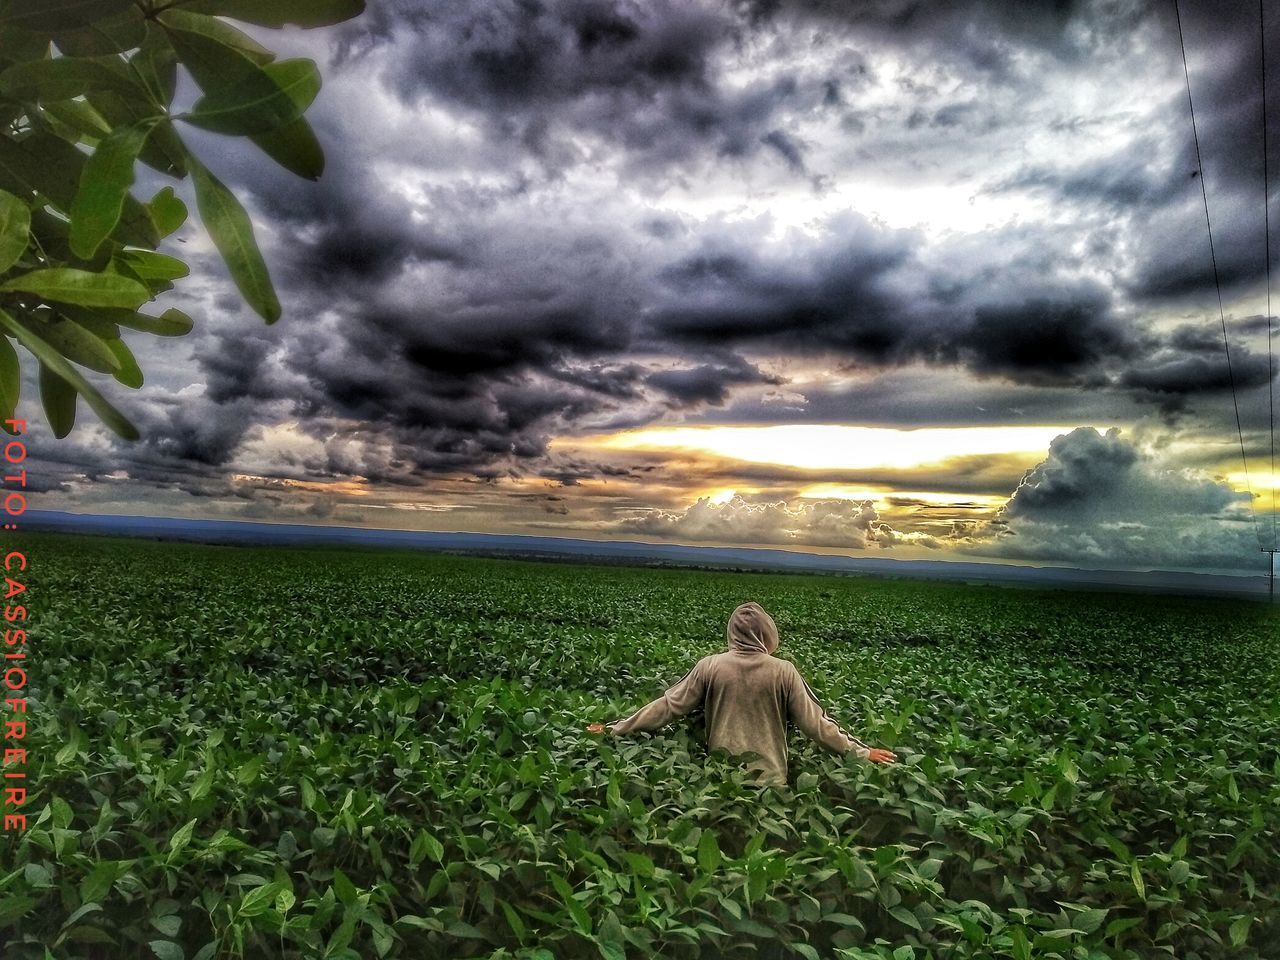 WOMAN ON FIELD AGAINST DRAMATIC SKY